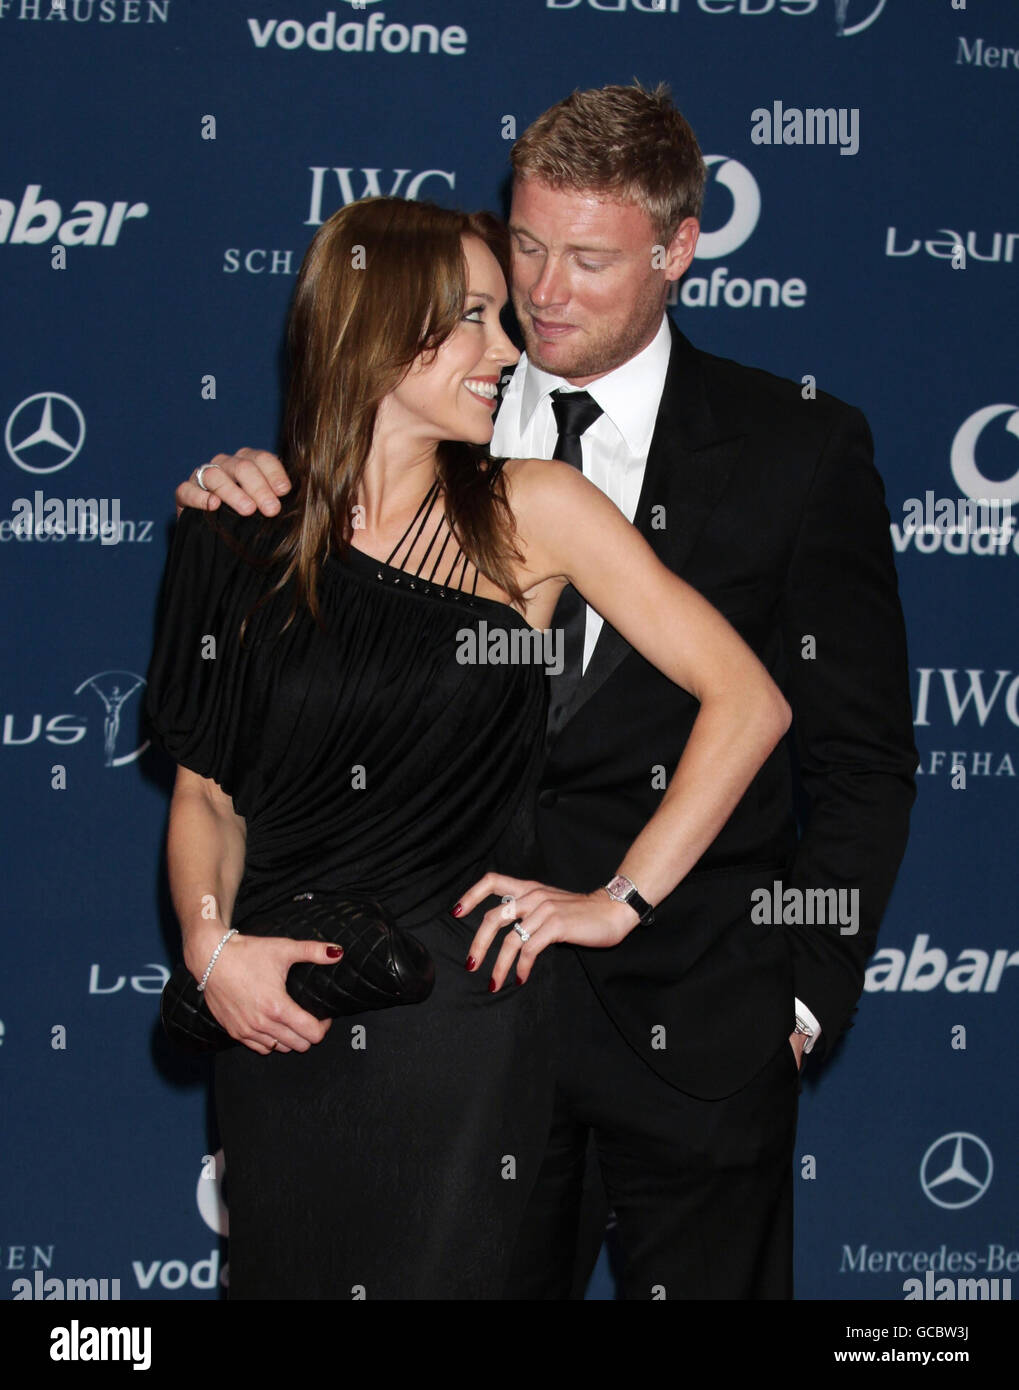 Andrew Flintoff and his wife Rachael arriving at the Laureus World Sports Awards, held at the Emirates Palace Hotel in Abu Dhabi. Stock Photo